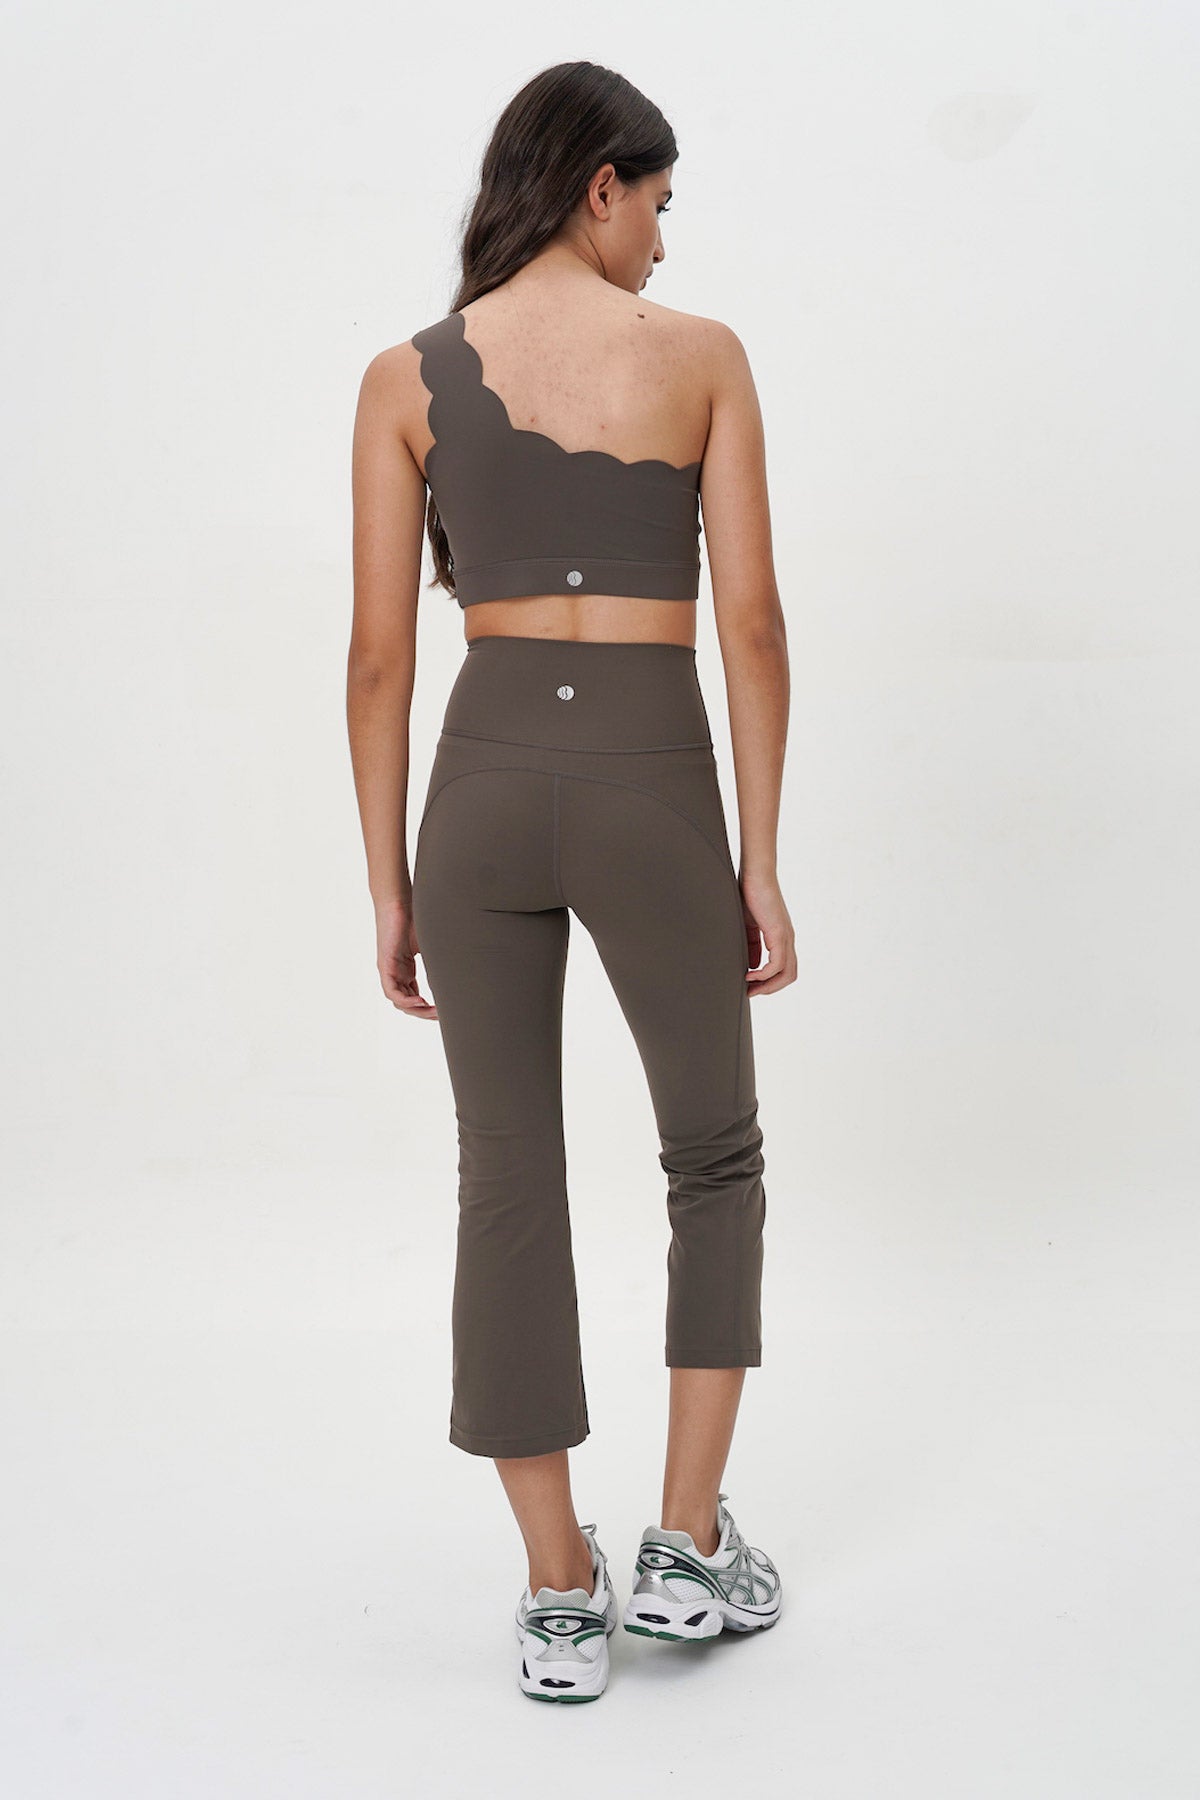 Clarity Flare Pants In Taupe (5 LEFT)